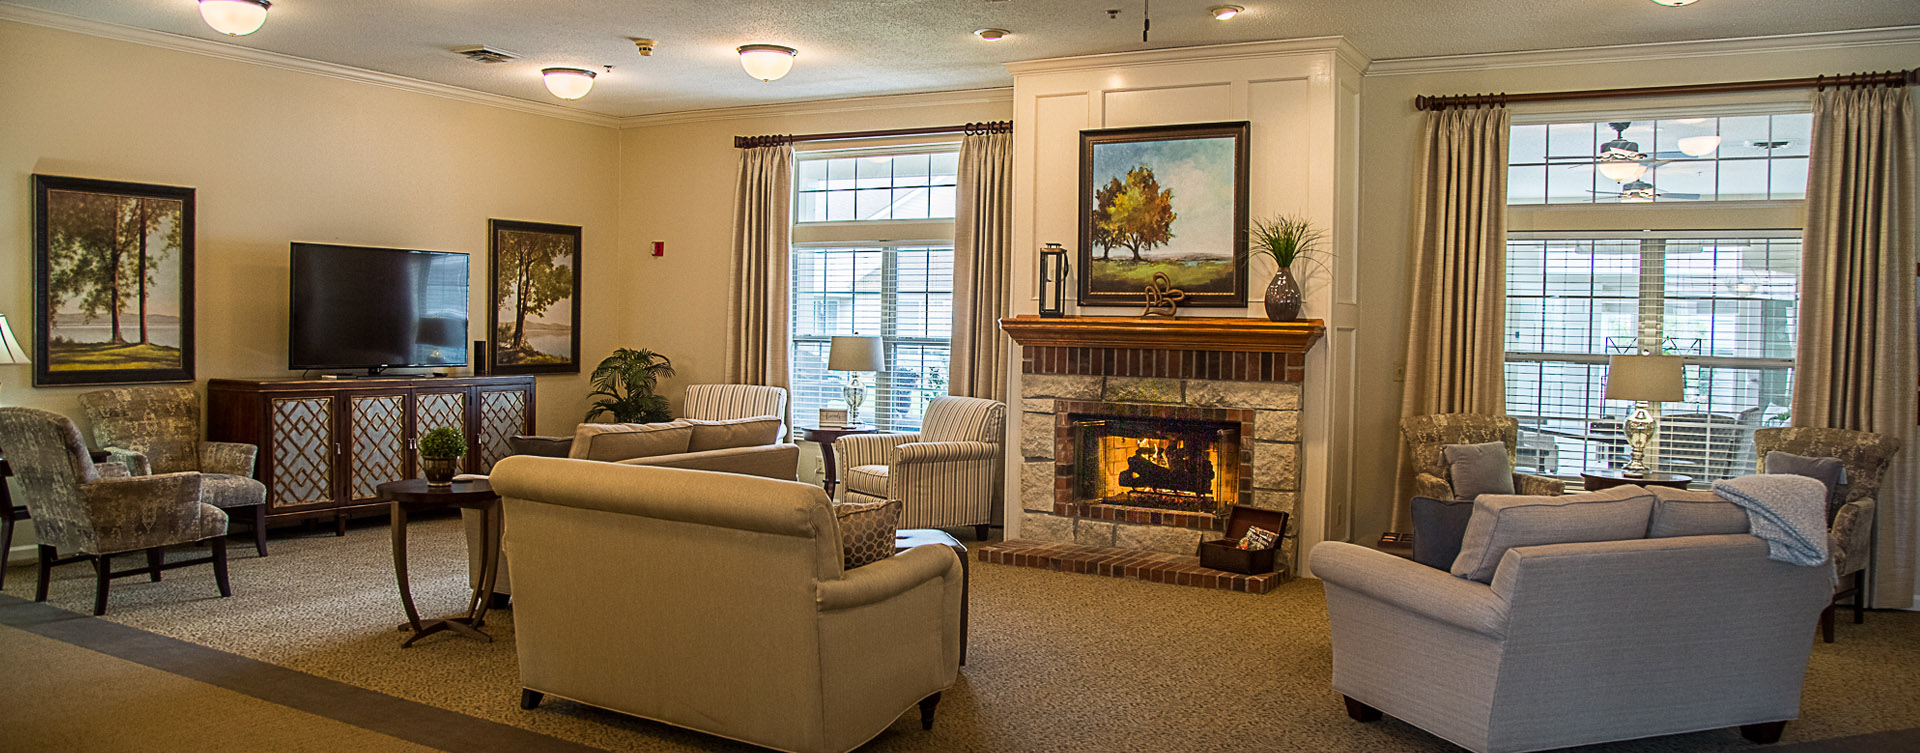 Enjoy a good book in the living room at Bickford of Davenport